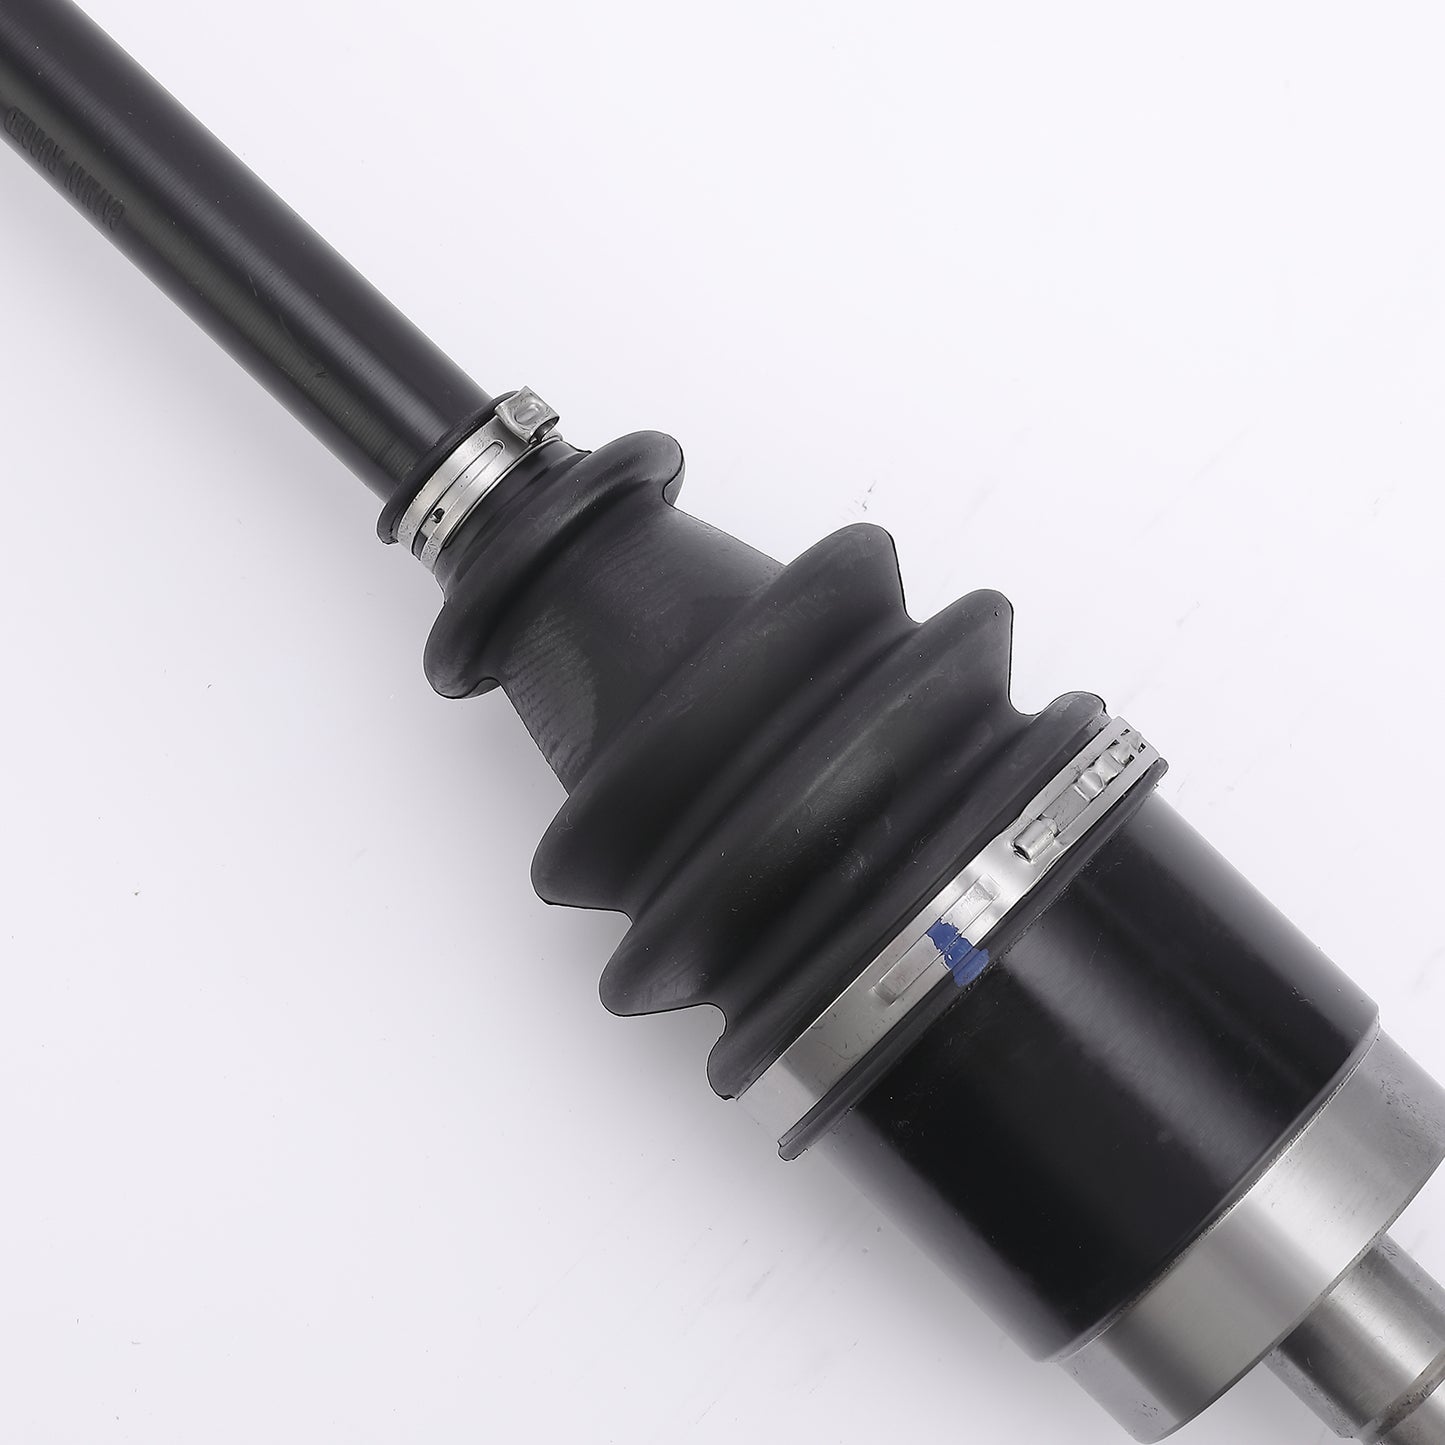 CAM-CA213 Front Right Drive Shaft CV Axle for 2020-2016 COMMANDER 800R 705400952,705401106